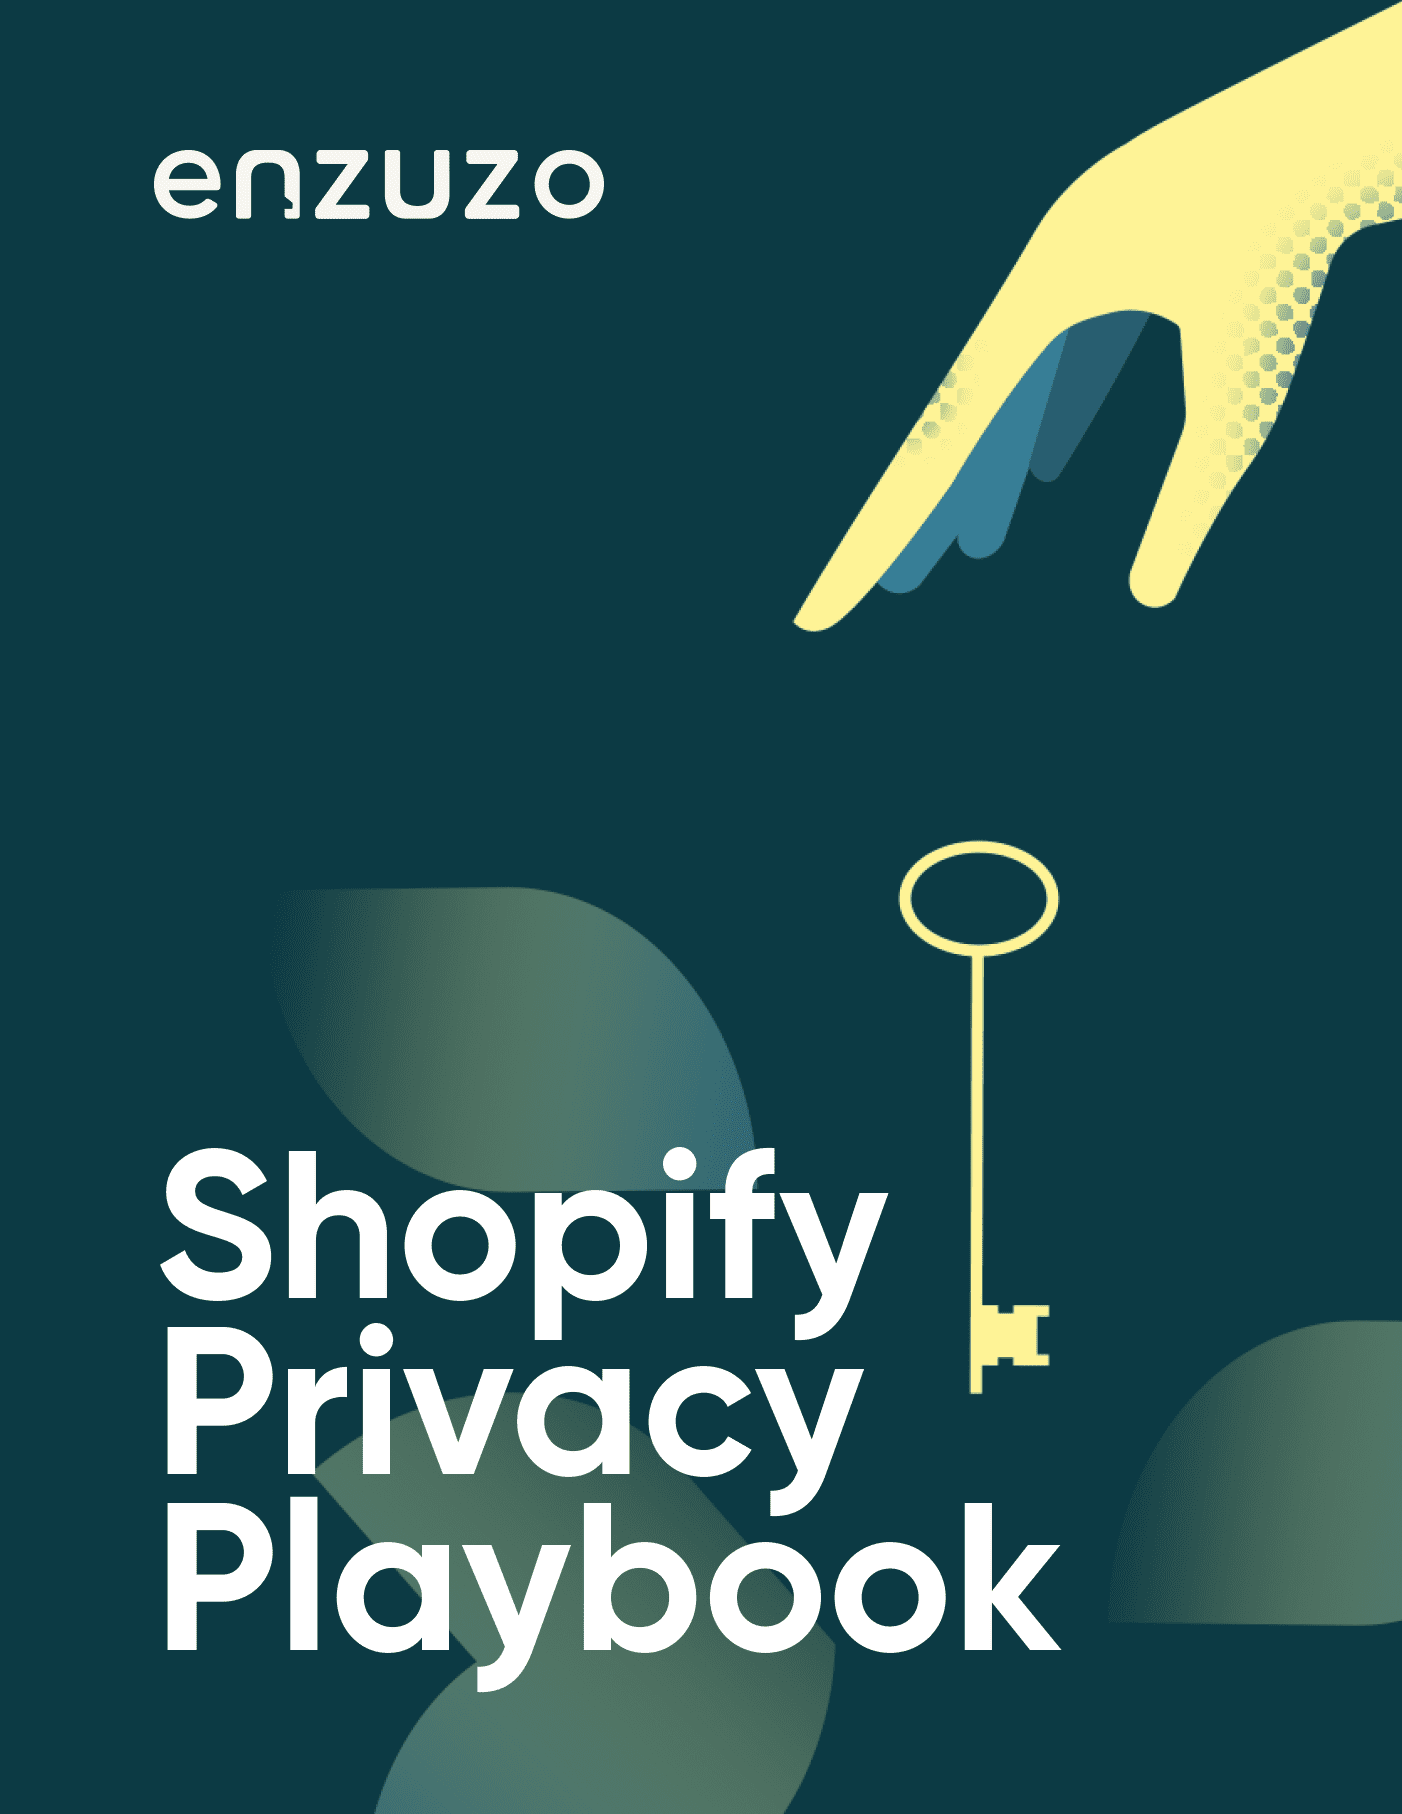 The Shopify Privacy Playbook